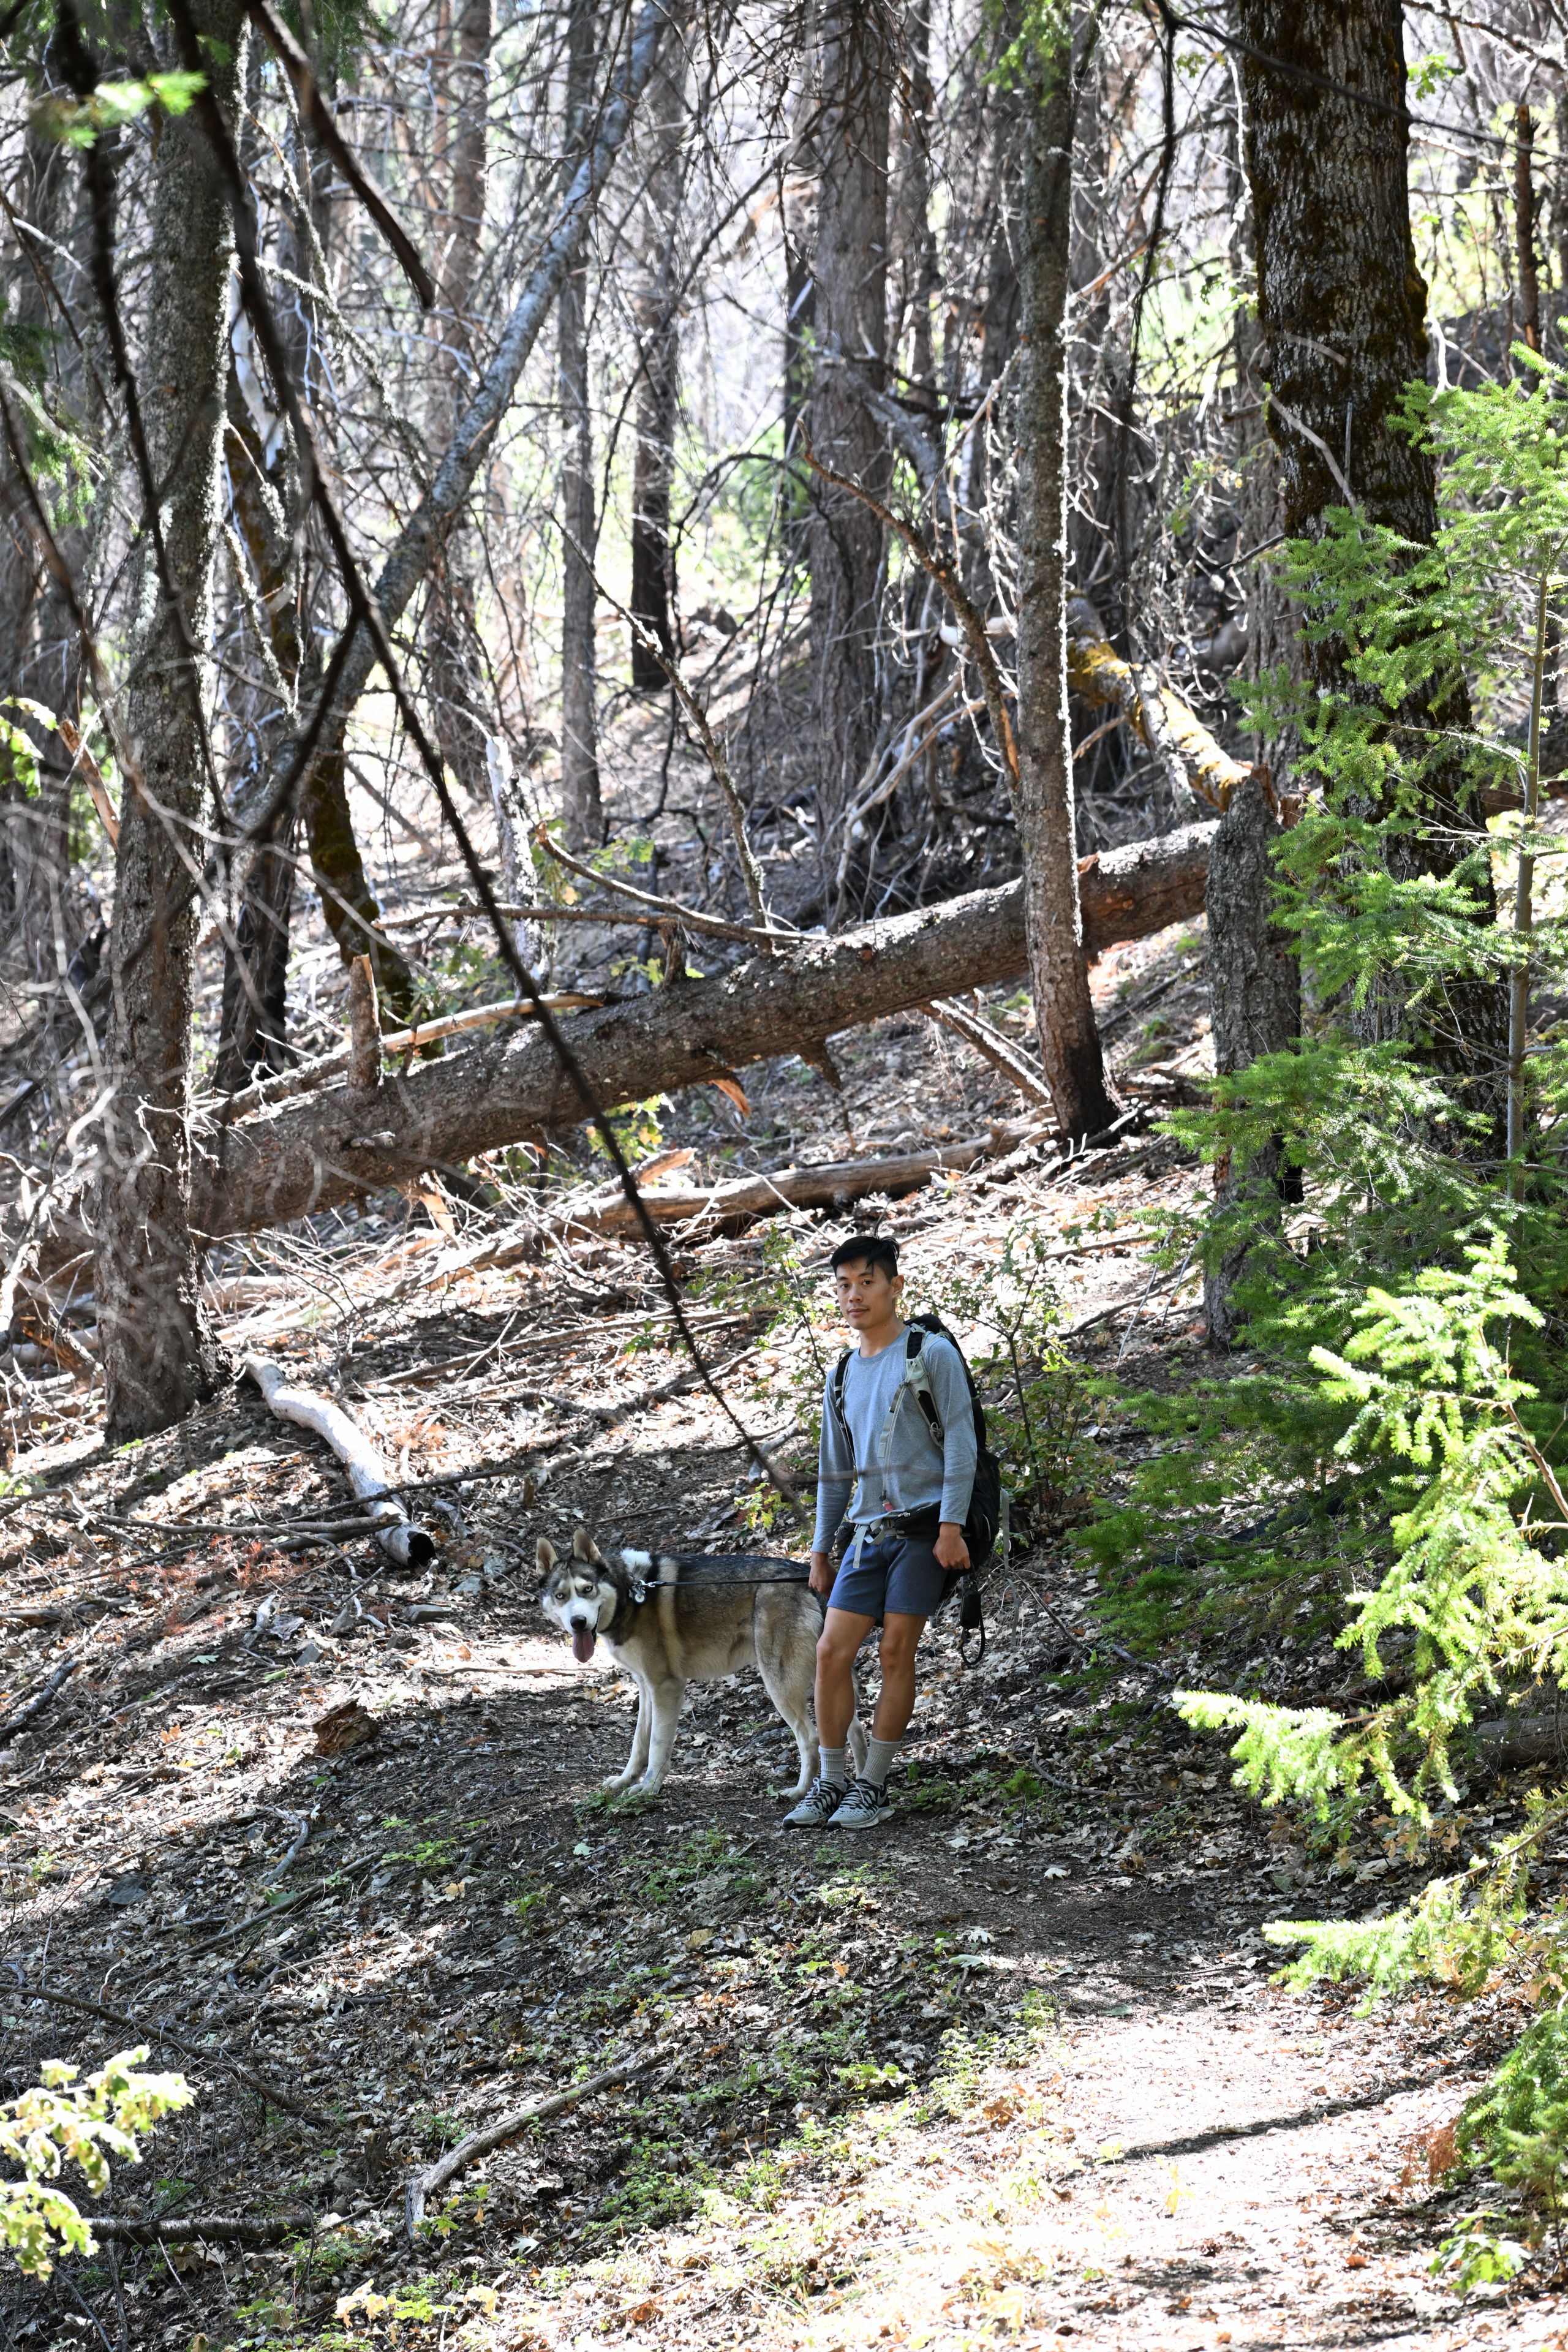 Hiking on the Deafy Glade Trail, 8W26, in Mendocino National Forest.